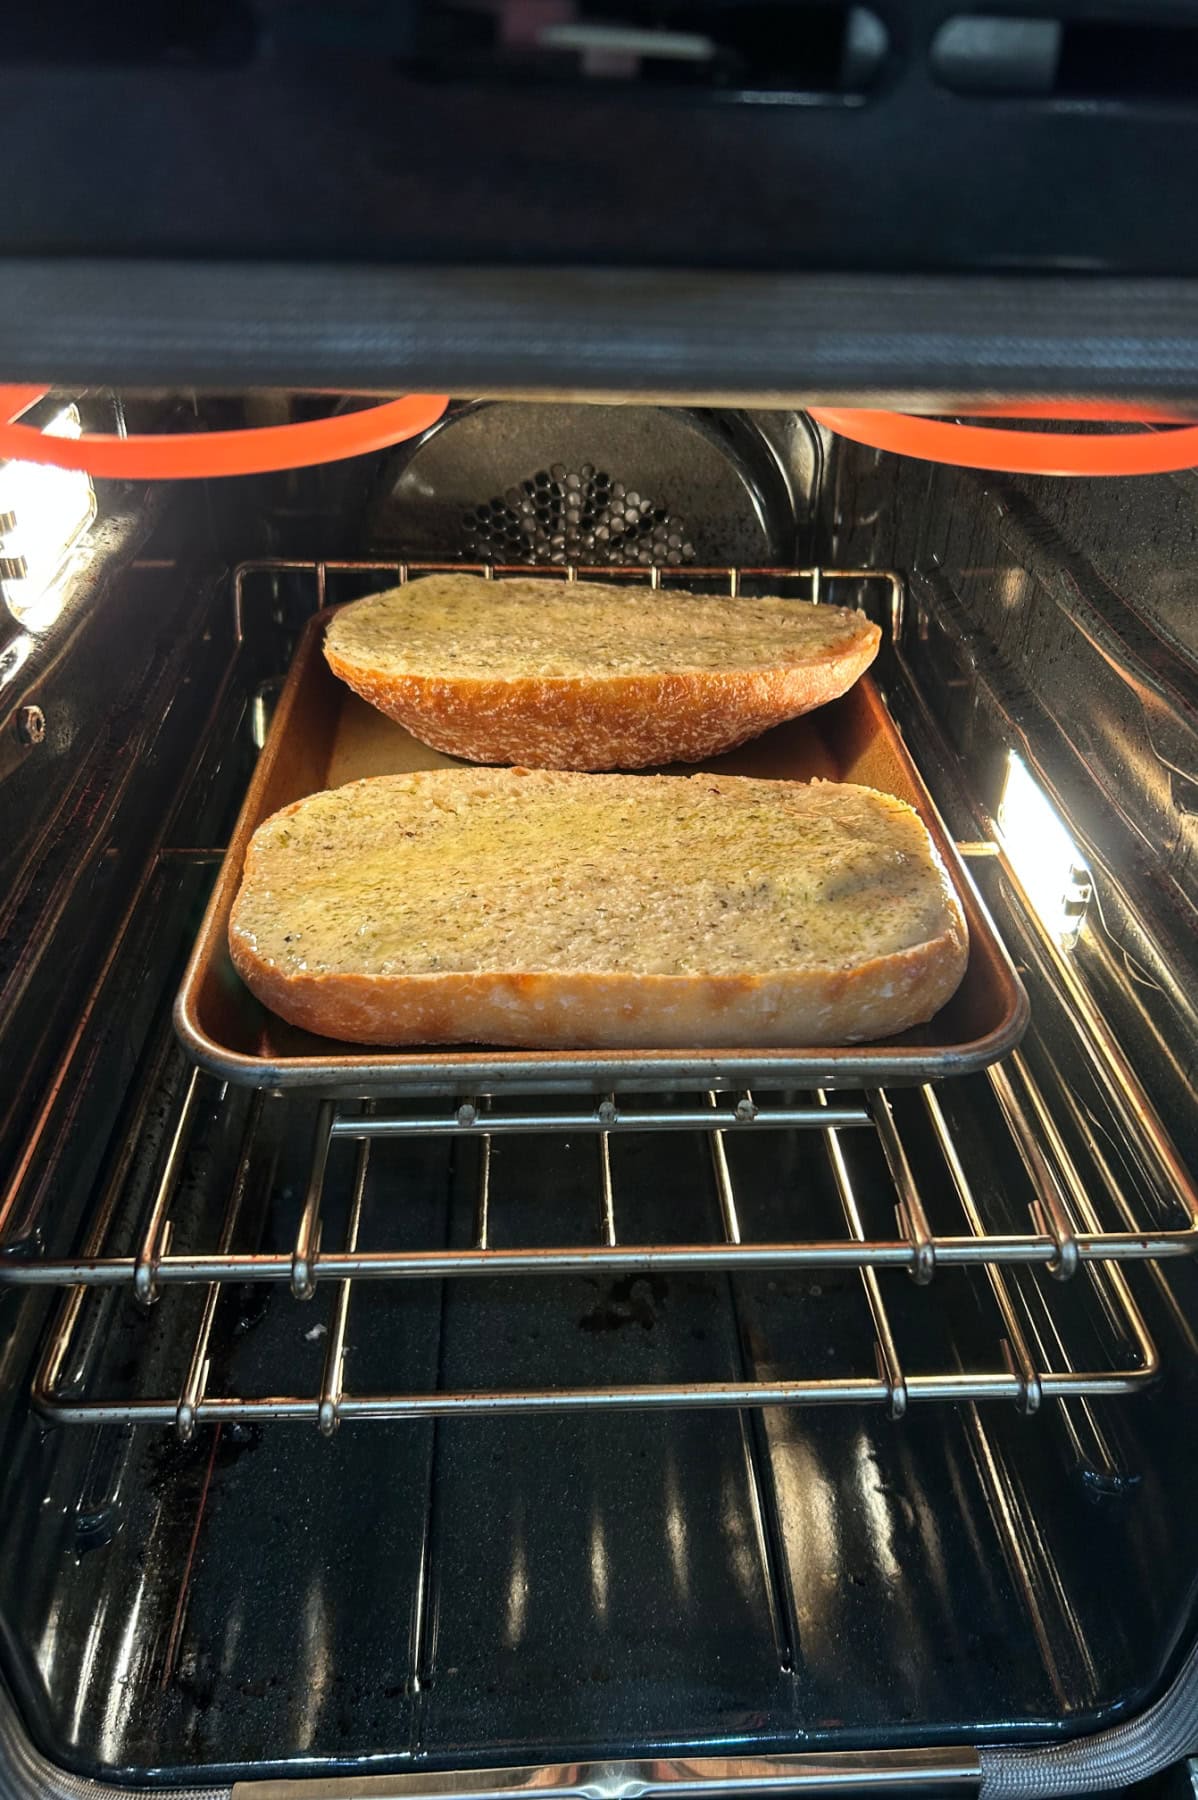 garlic bread broiling in oven